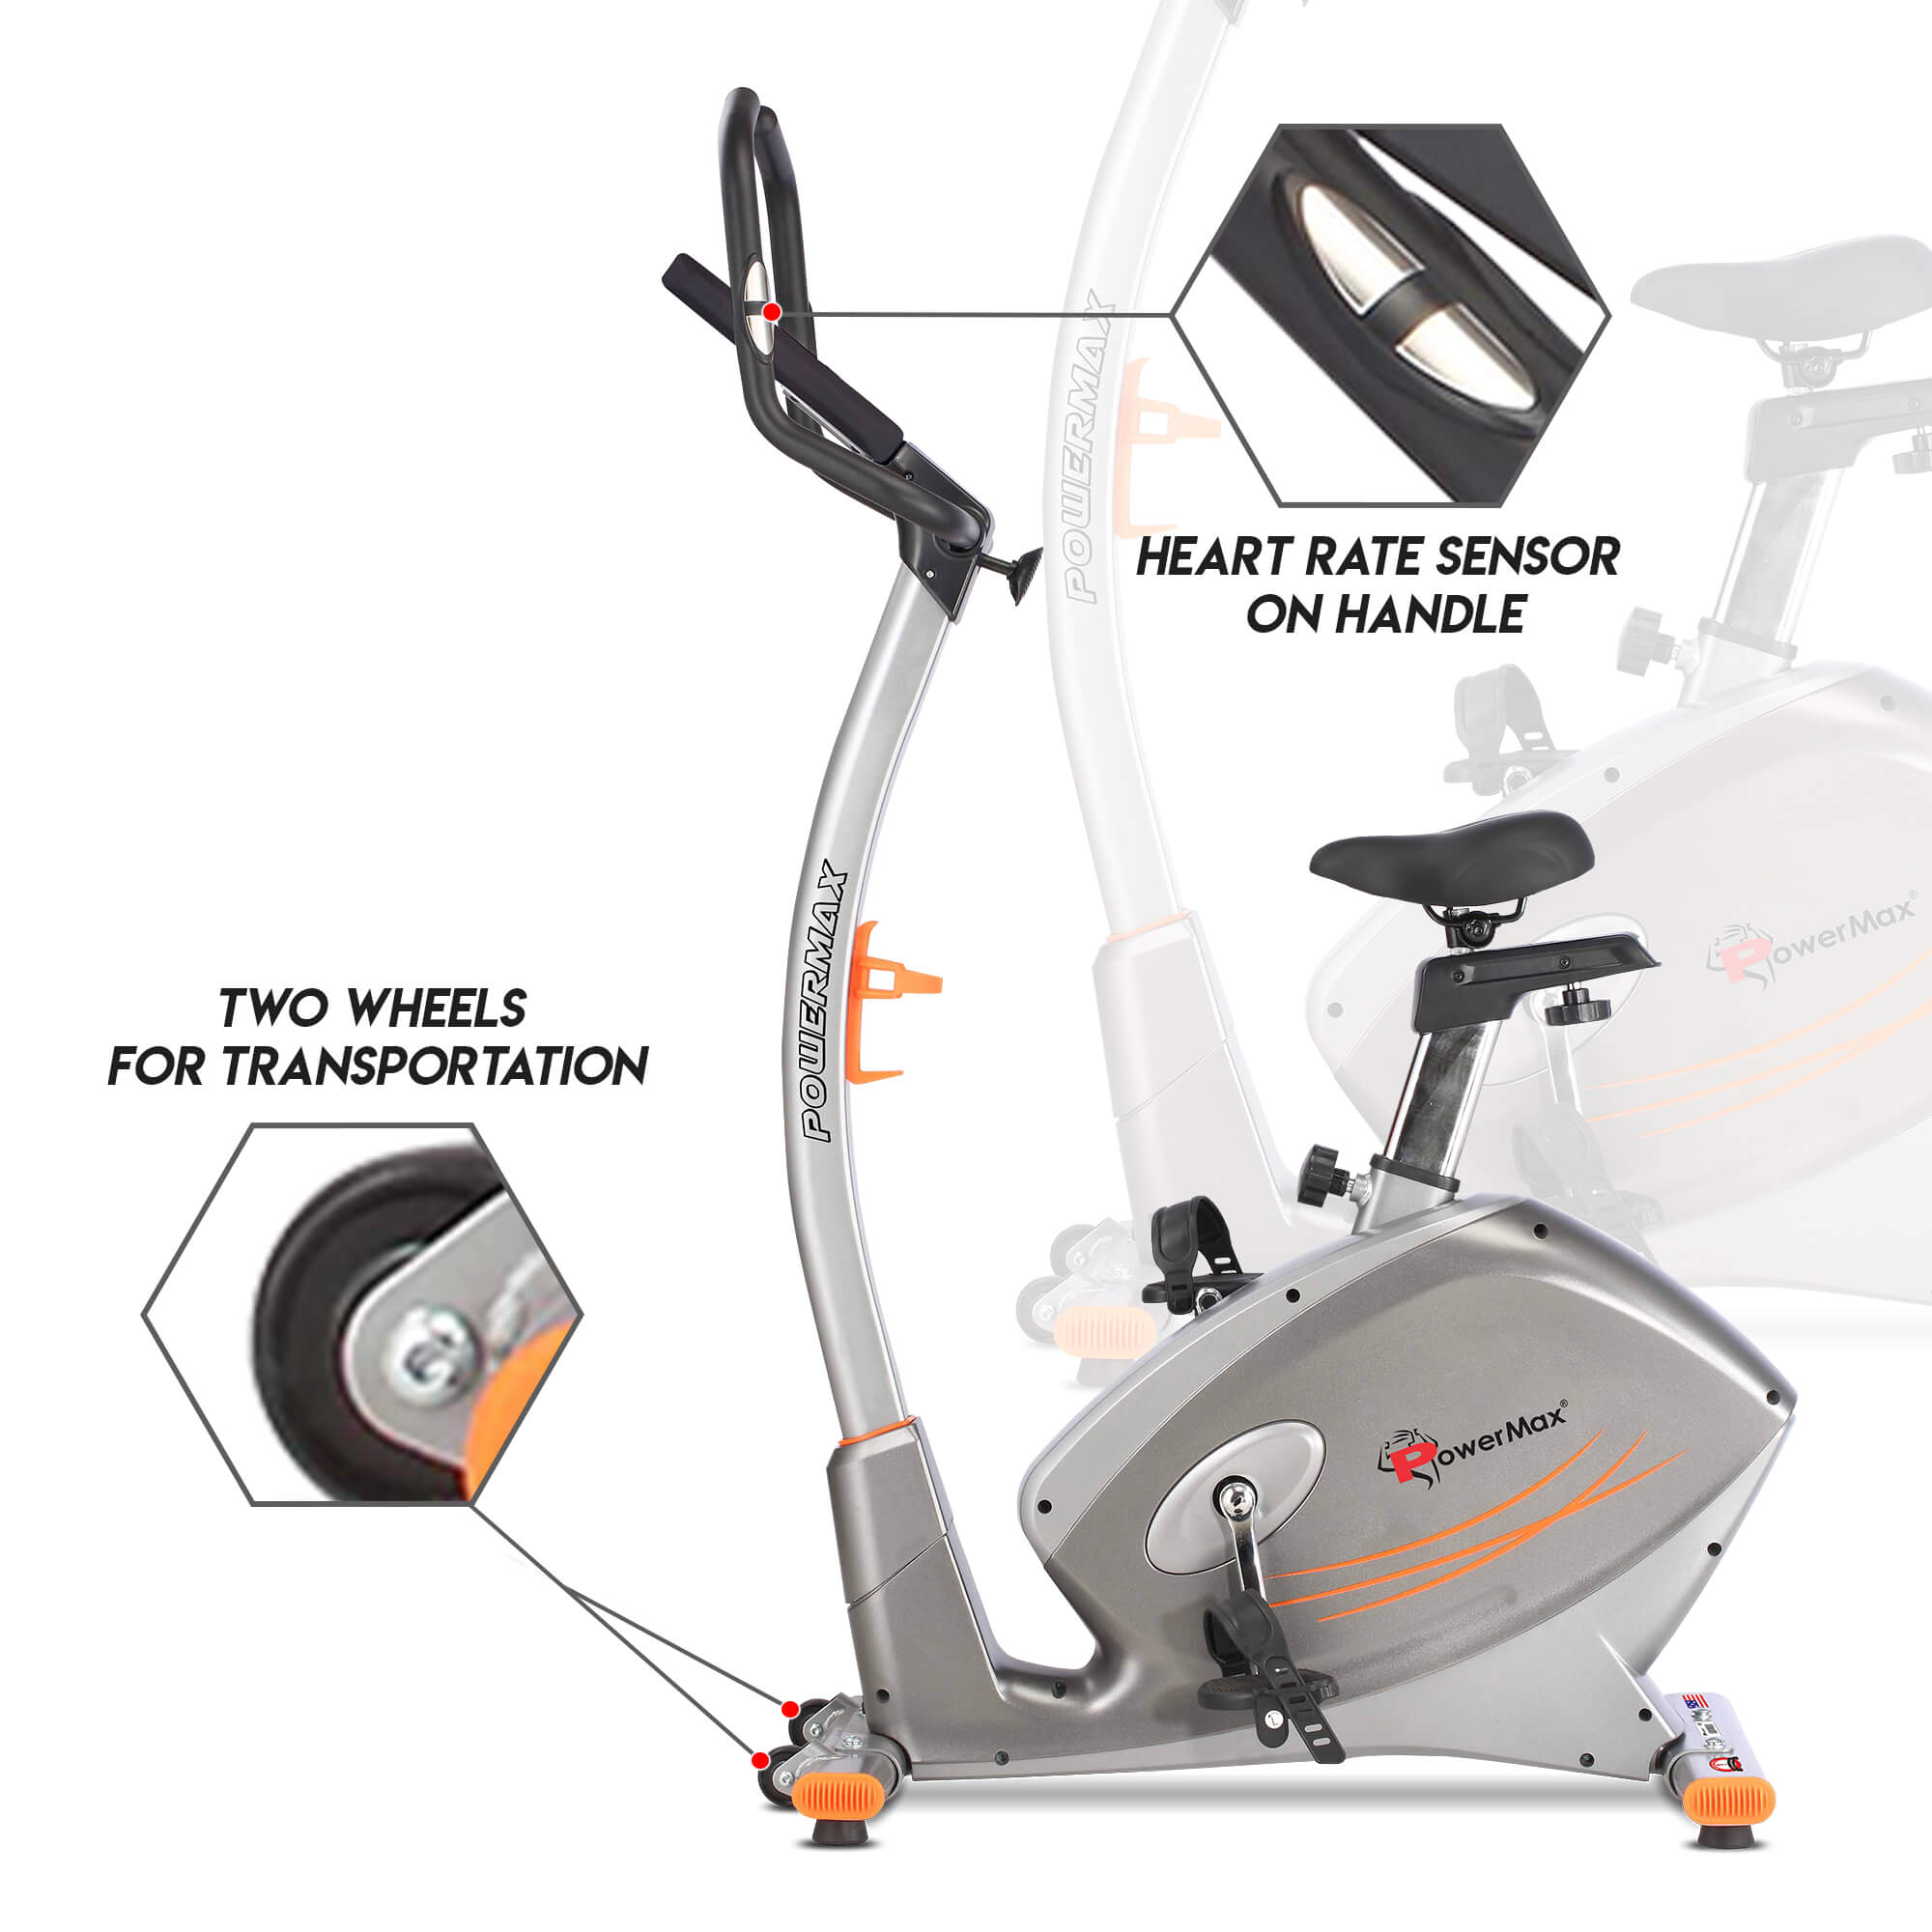 PowerMax Fitness BU-750 Upright Exercise Bike with Hand Pulse, Water Bottle Cage for Home Use